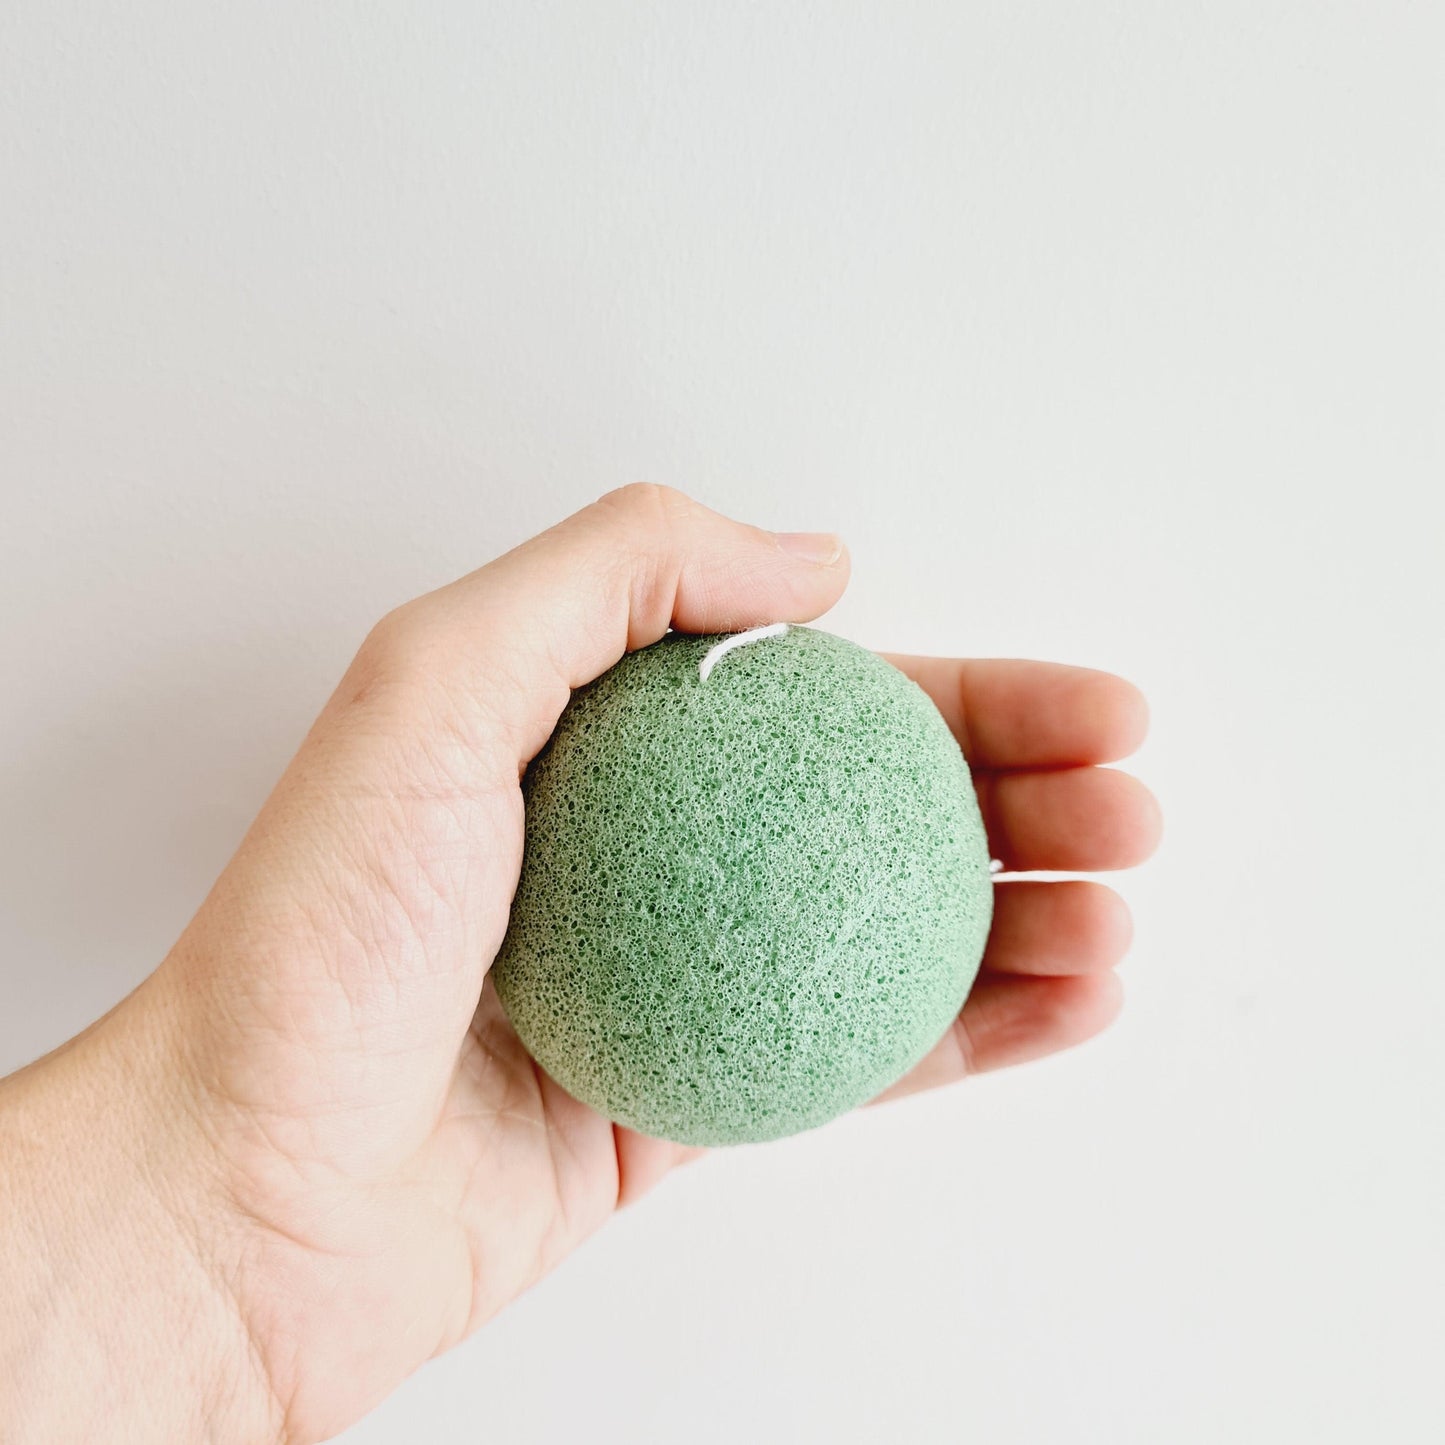 Bundle pack 3xKonjac Sponges - Green for normal to oily skin - Dust & Glow